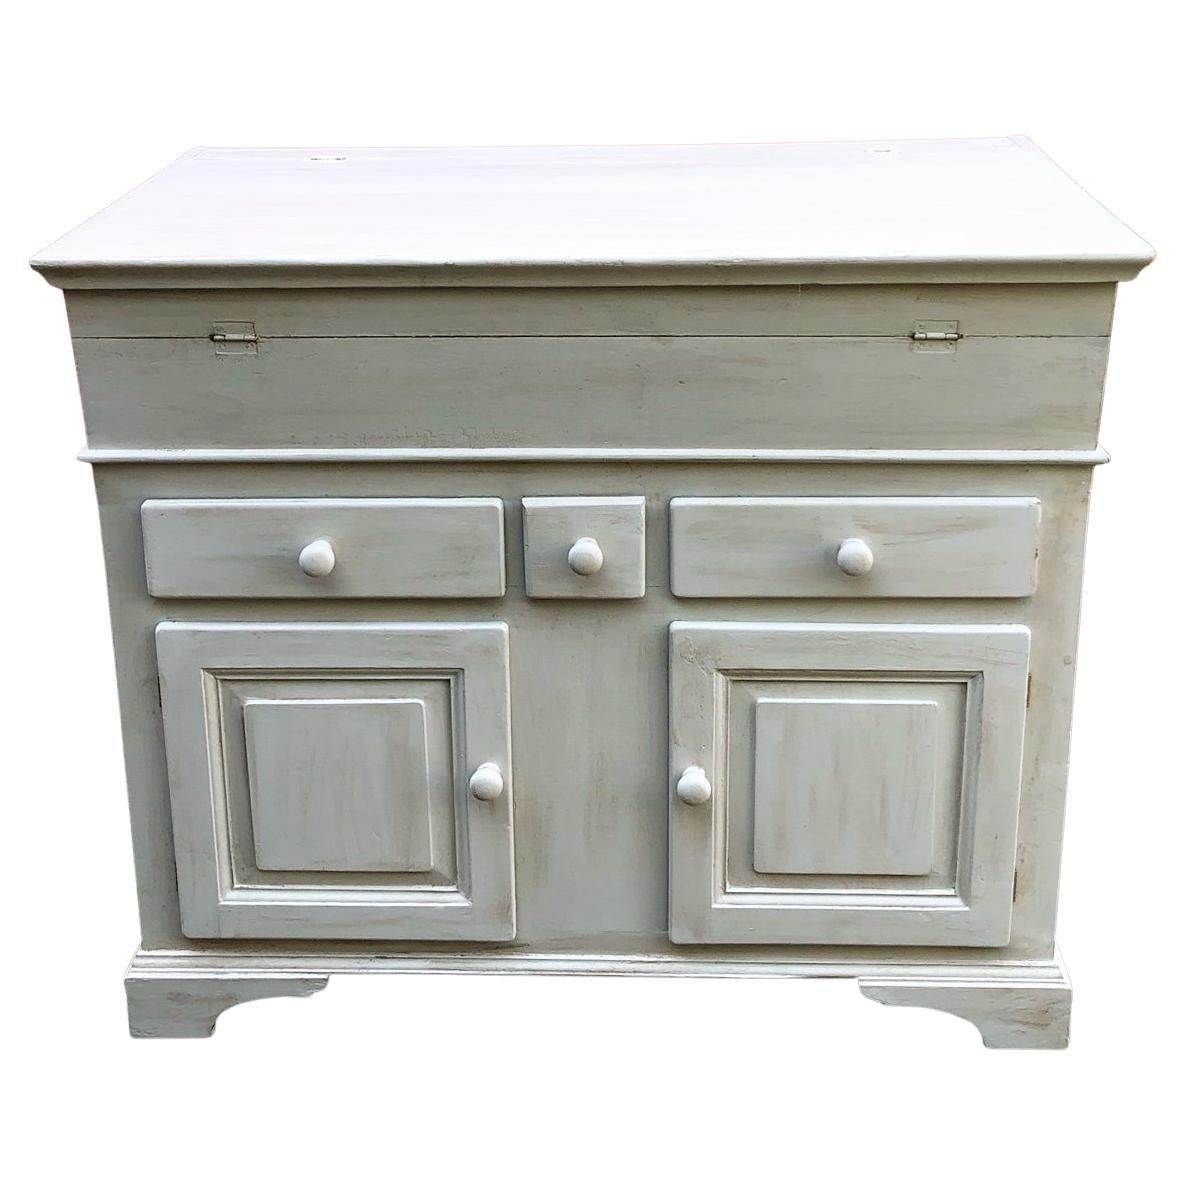 20th century Italian sideboard in alder wood, external color white patinated 